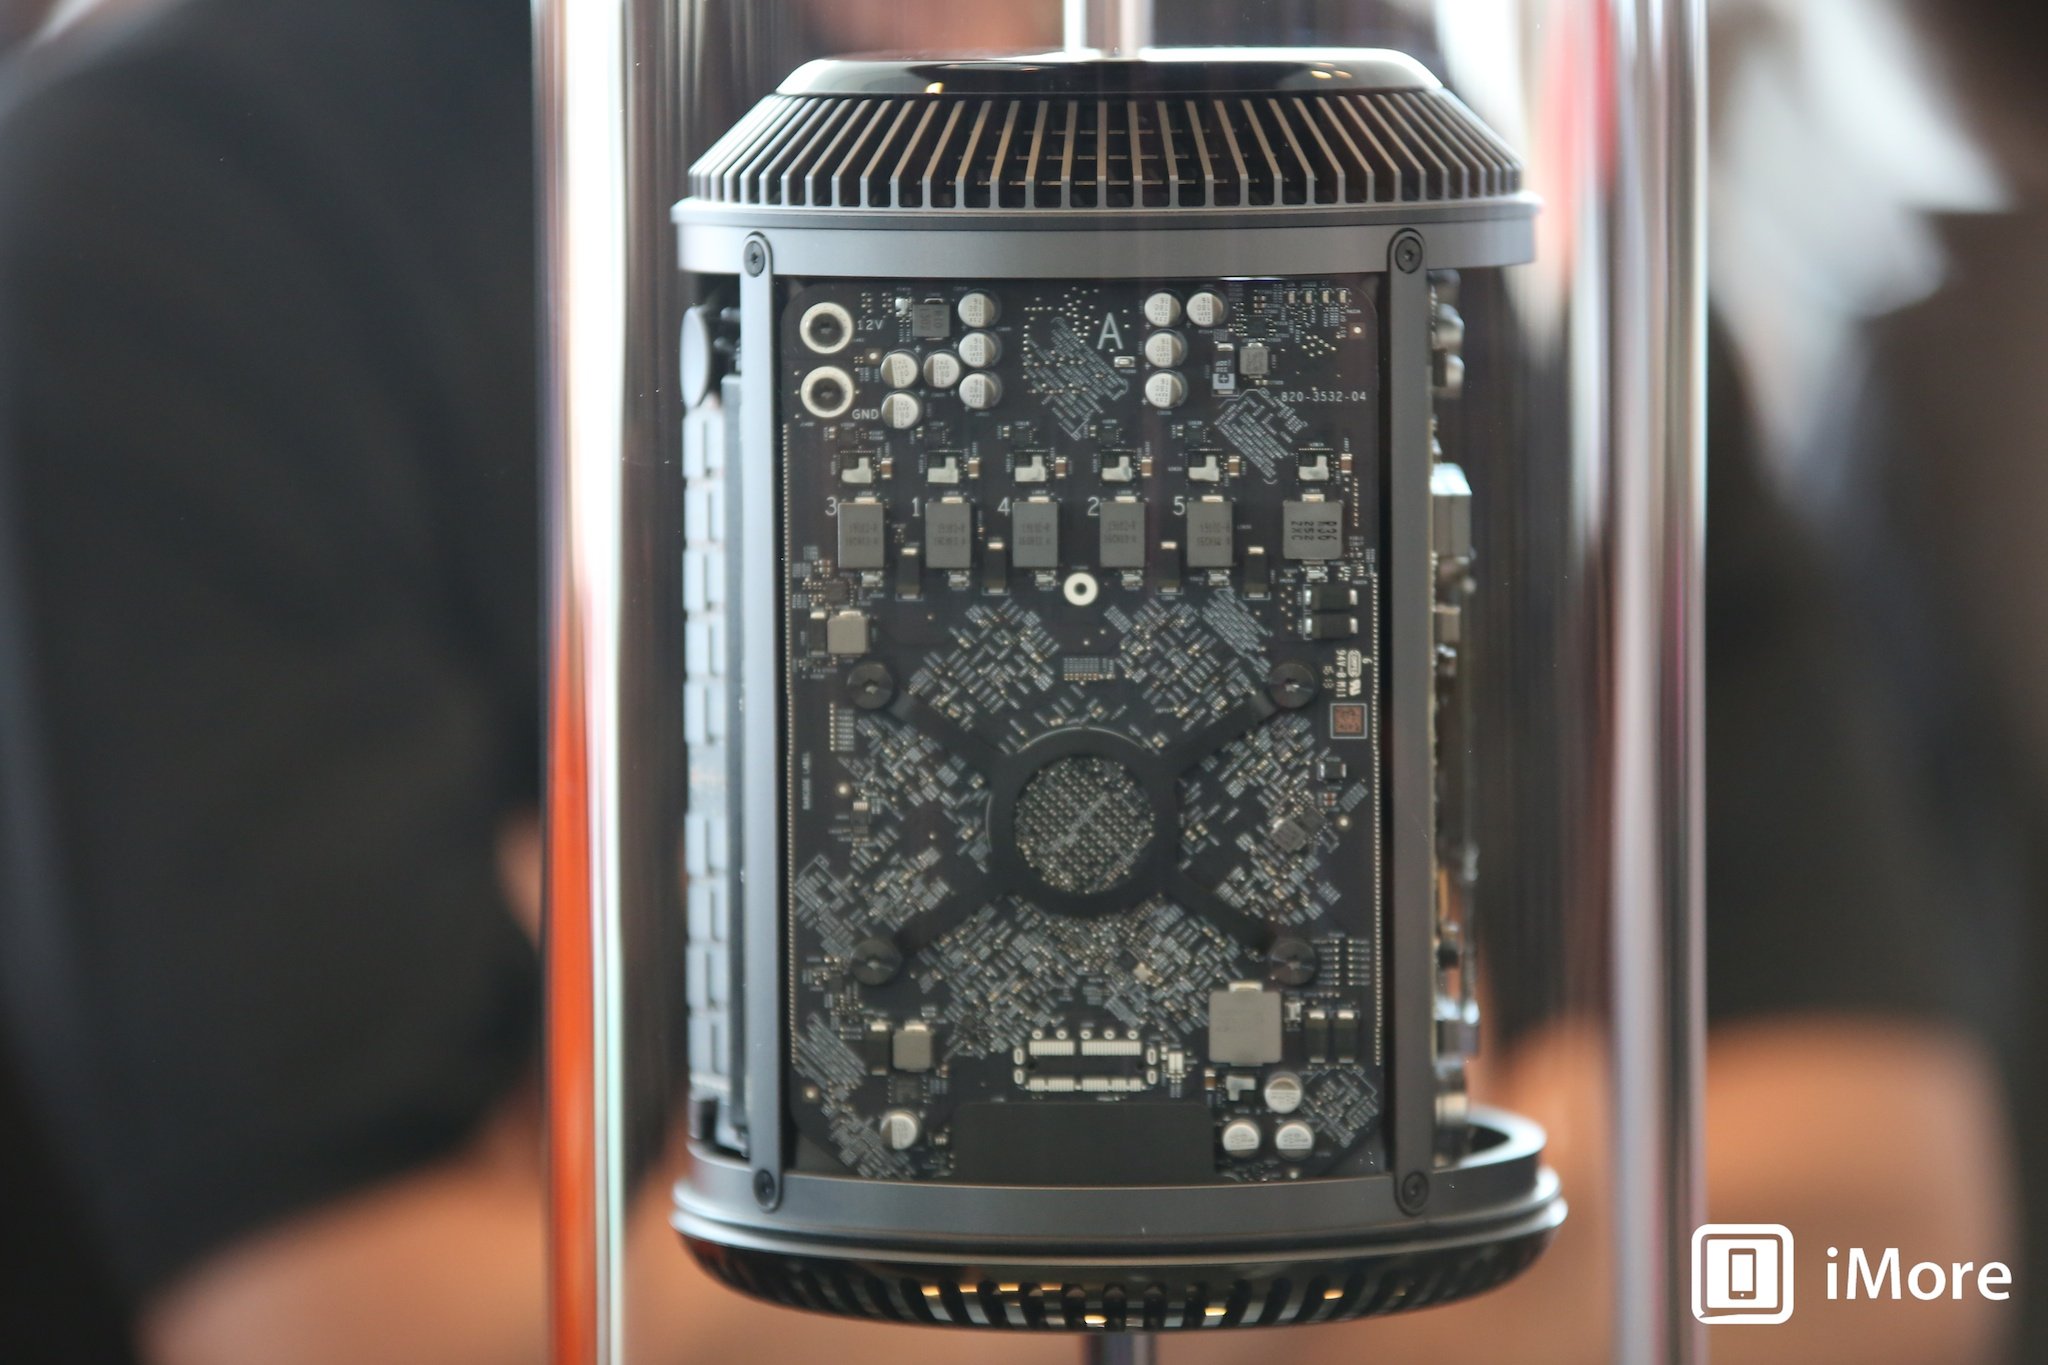 Will the new Mac Pro make your office look like an episode of Hoarders?